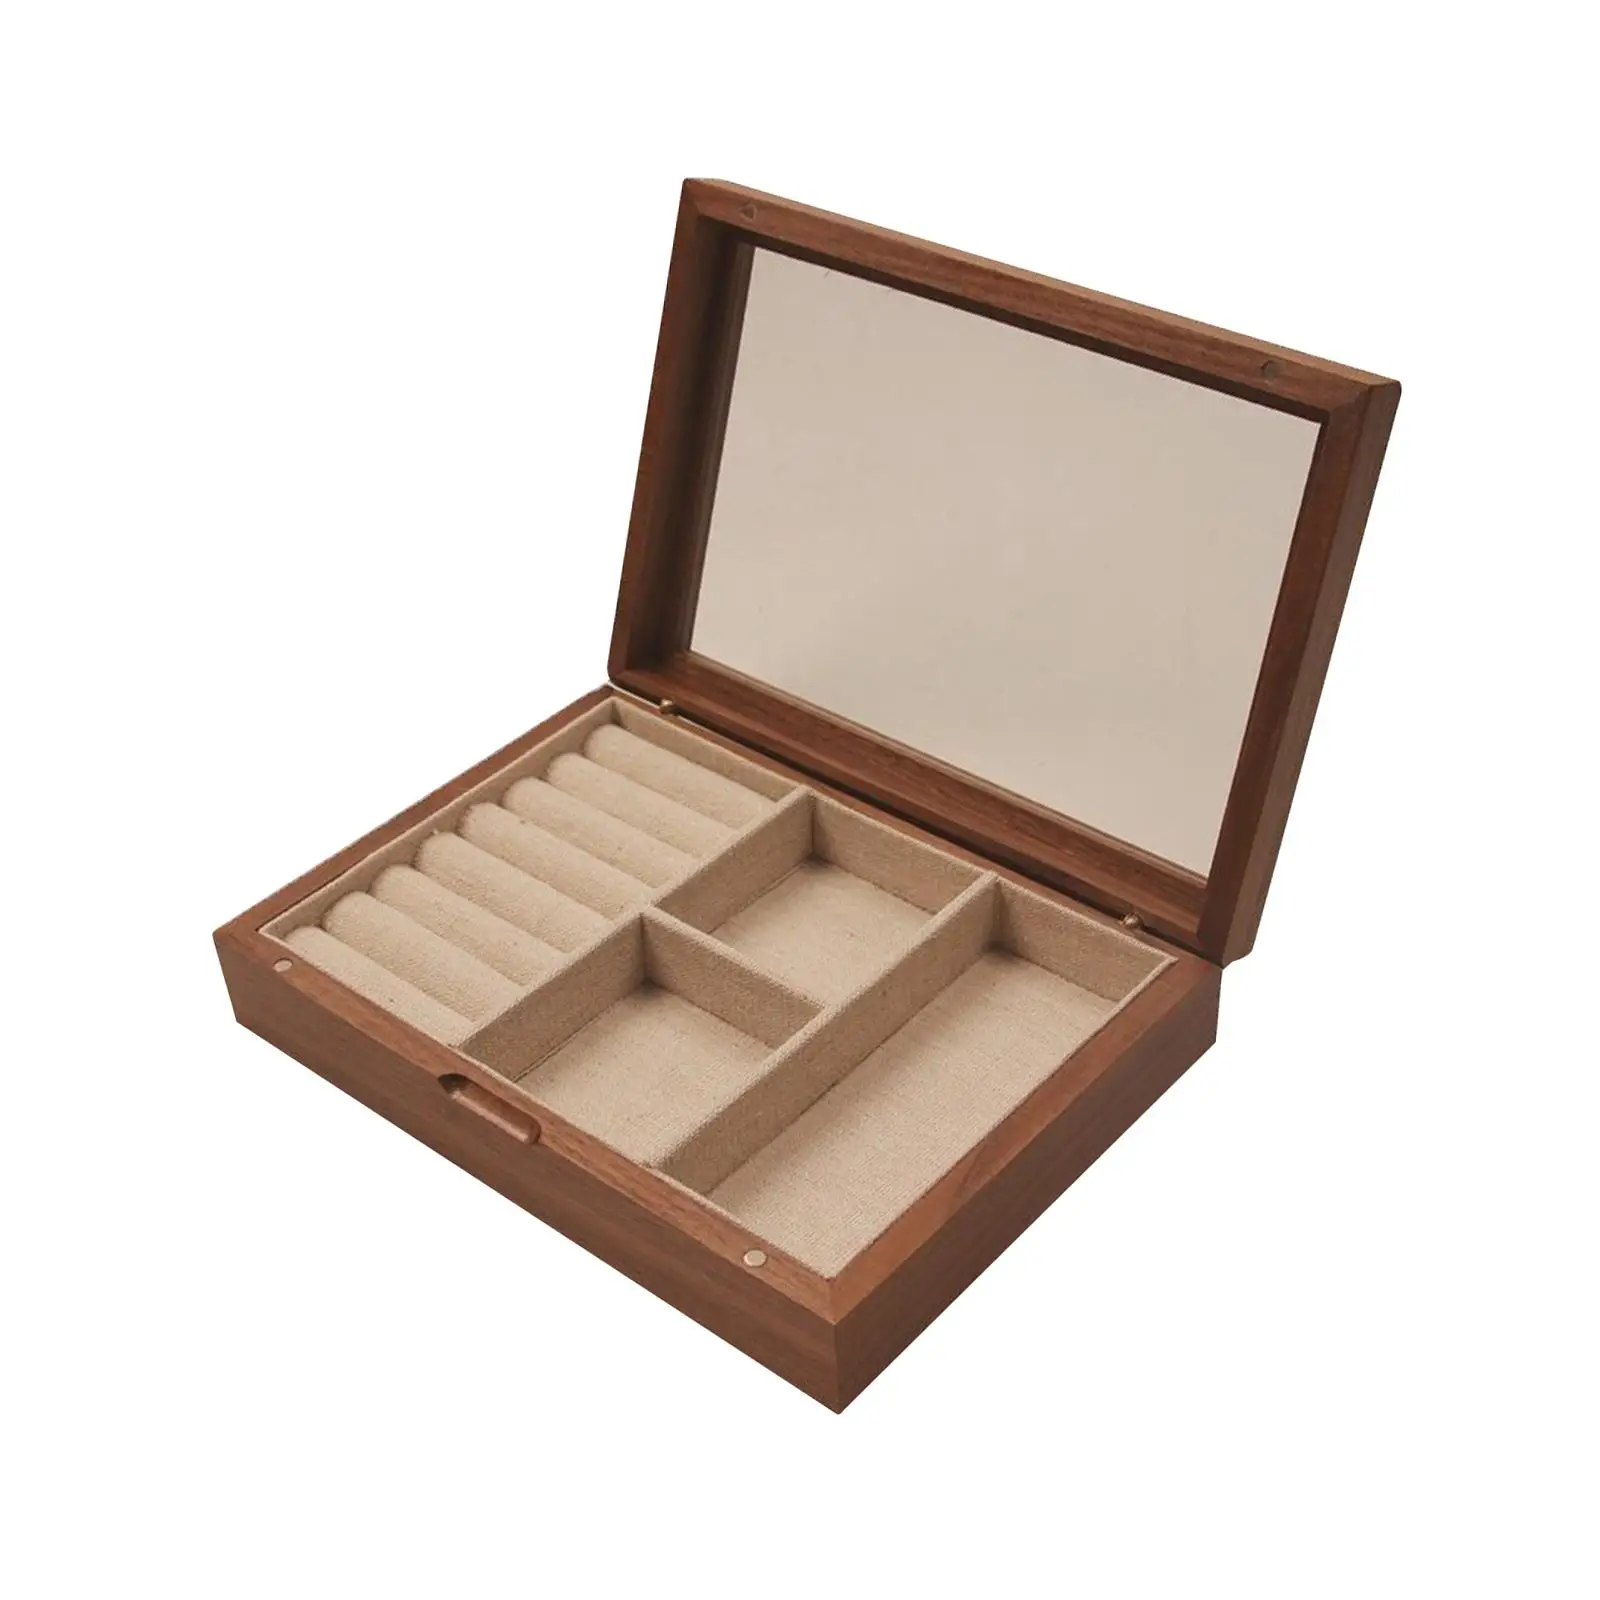 Jewelry Box Wooden Transparent Window for Women Girls Large Capacity Jewelry Storage Jewelry Display Case for Bracelets Earrings